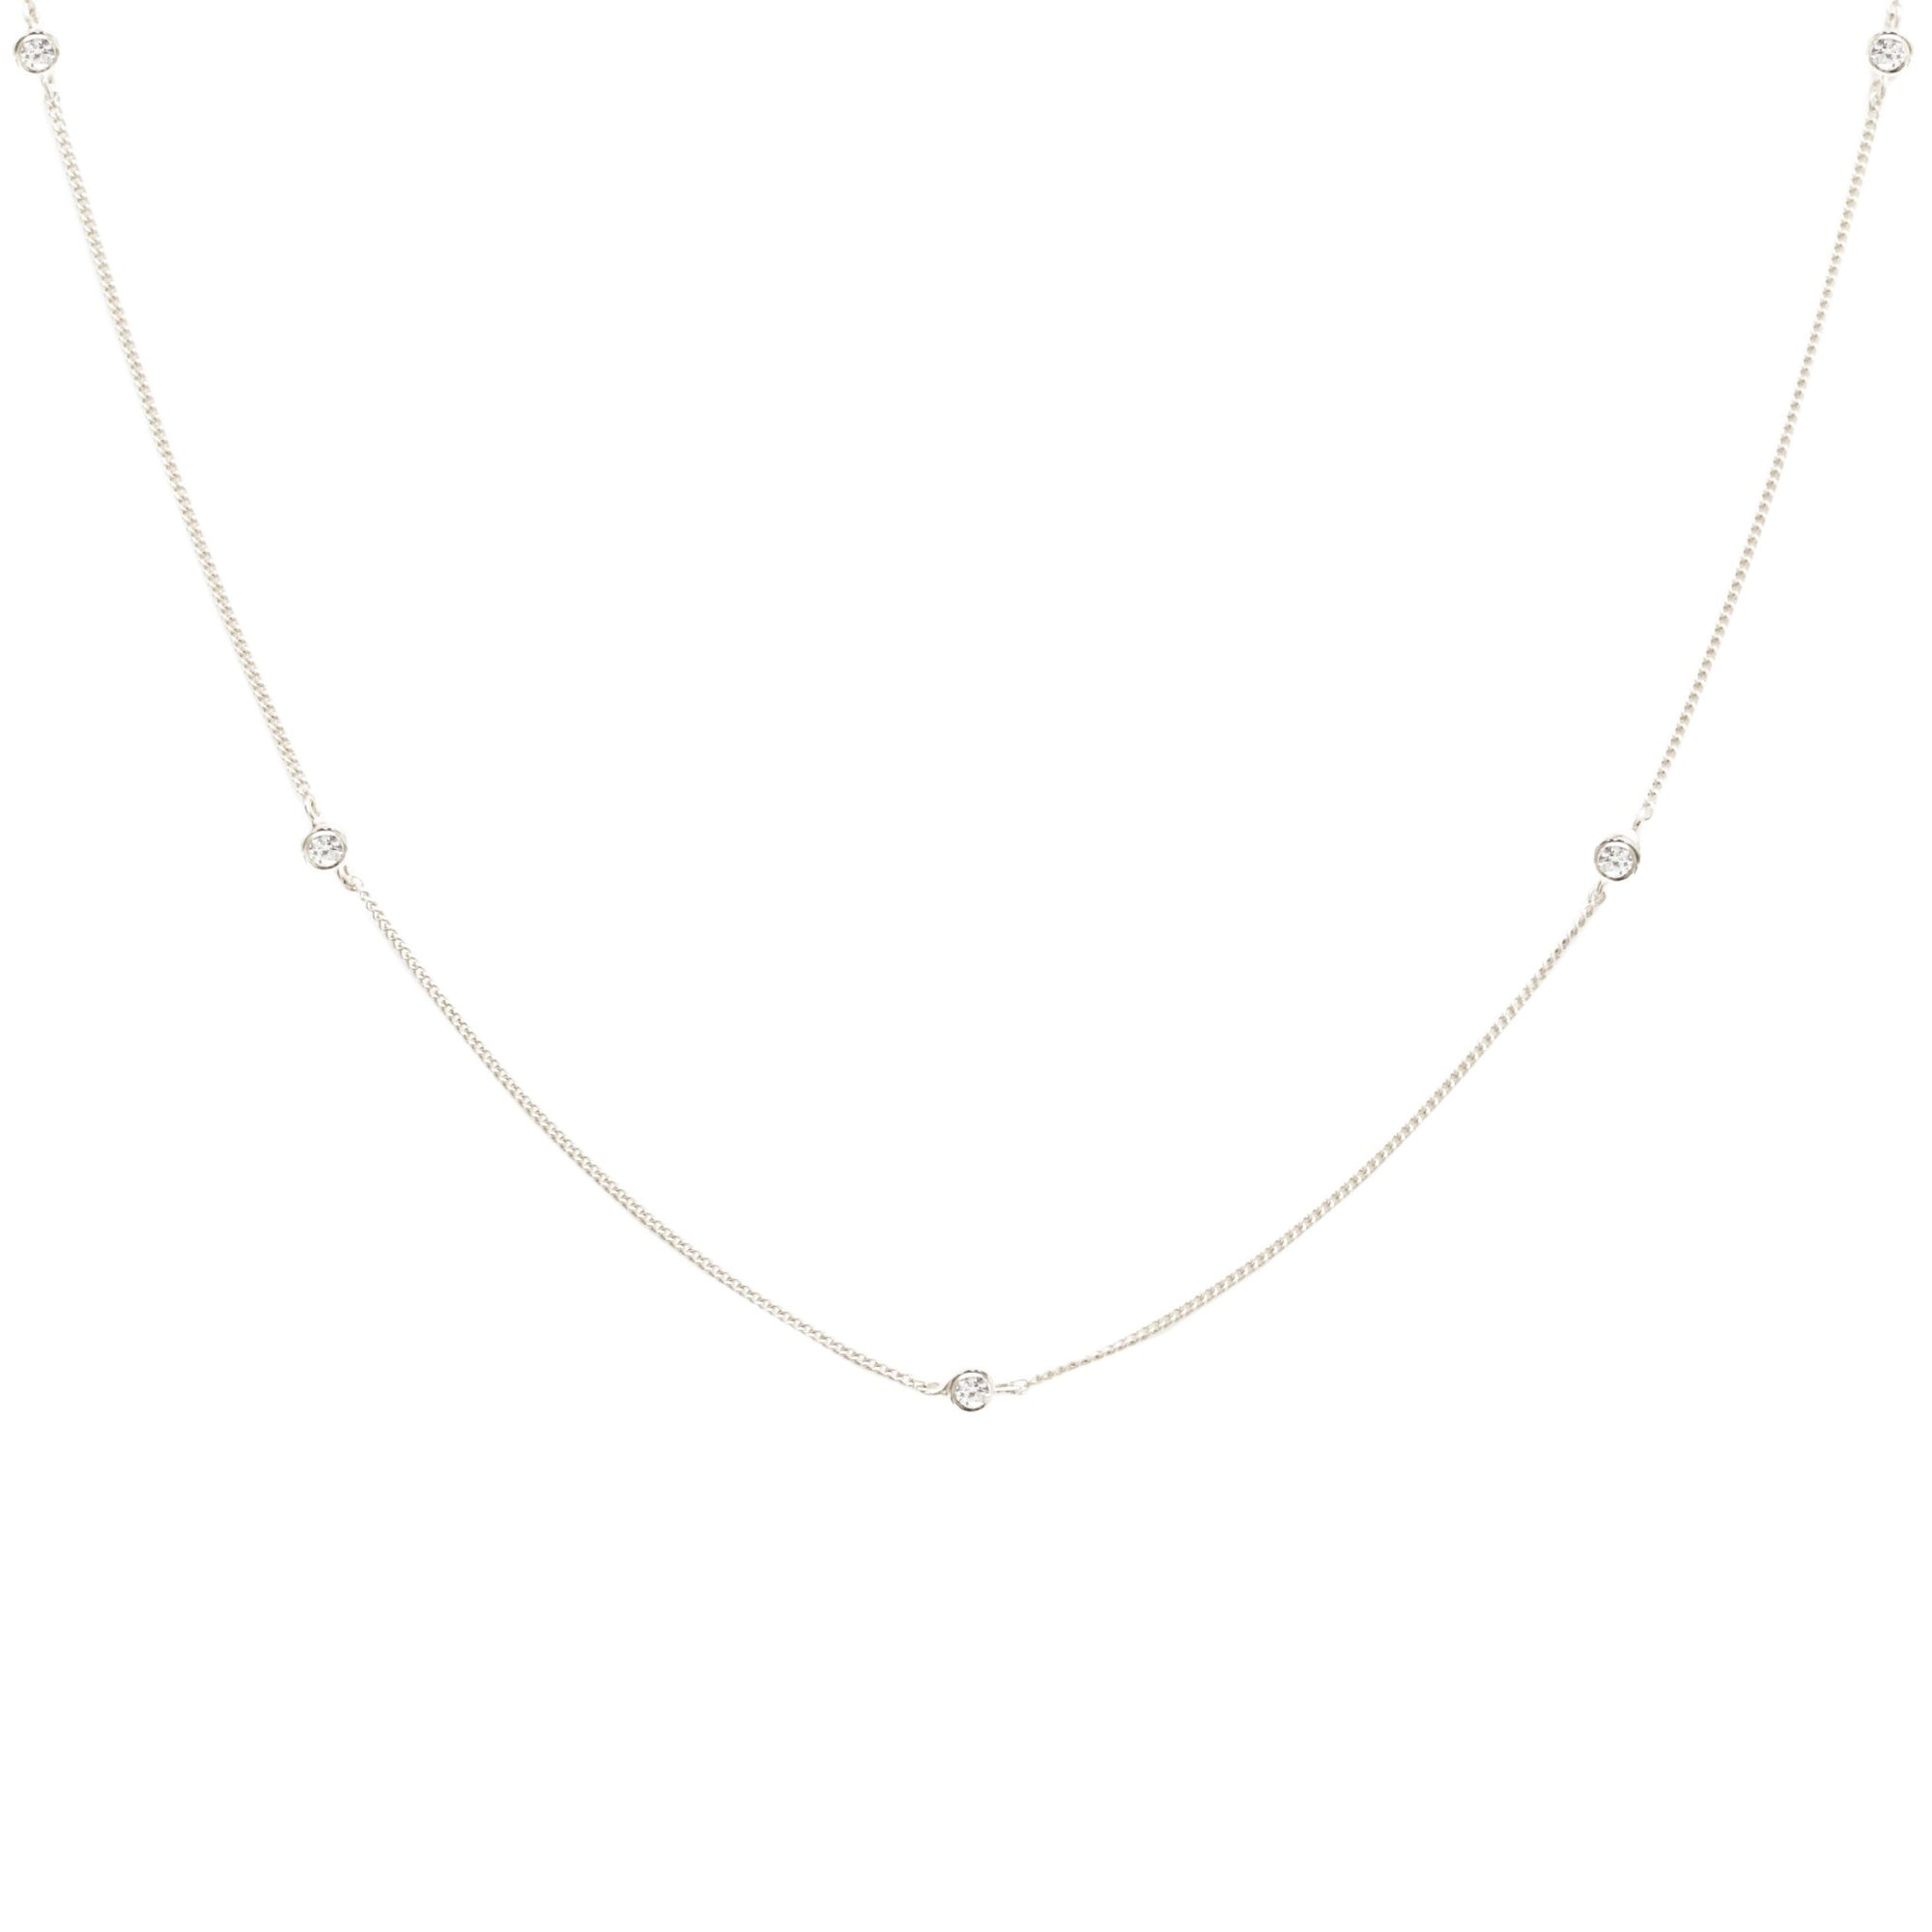 Tiny Love Necklace - Cubic Zirconia & Silver - SO PRETTY CARA COTTER